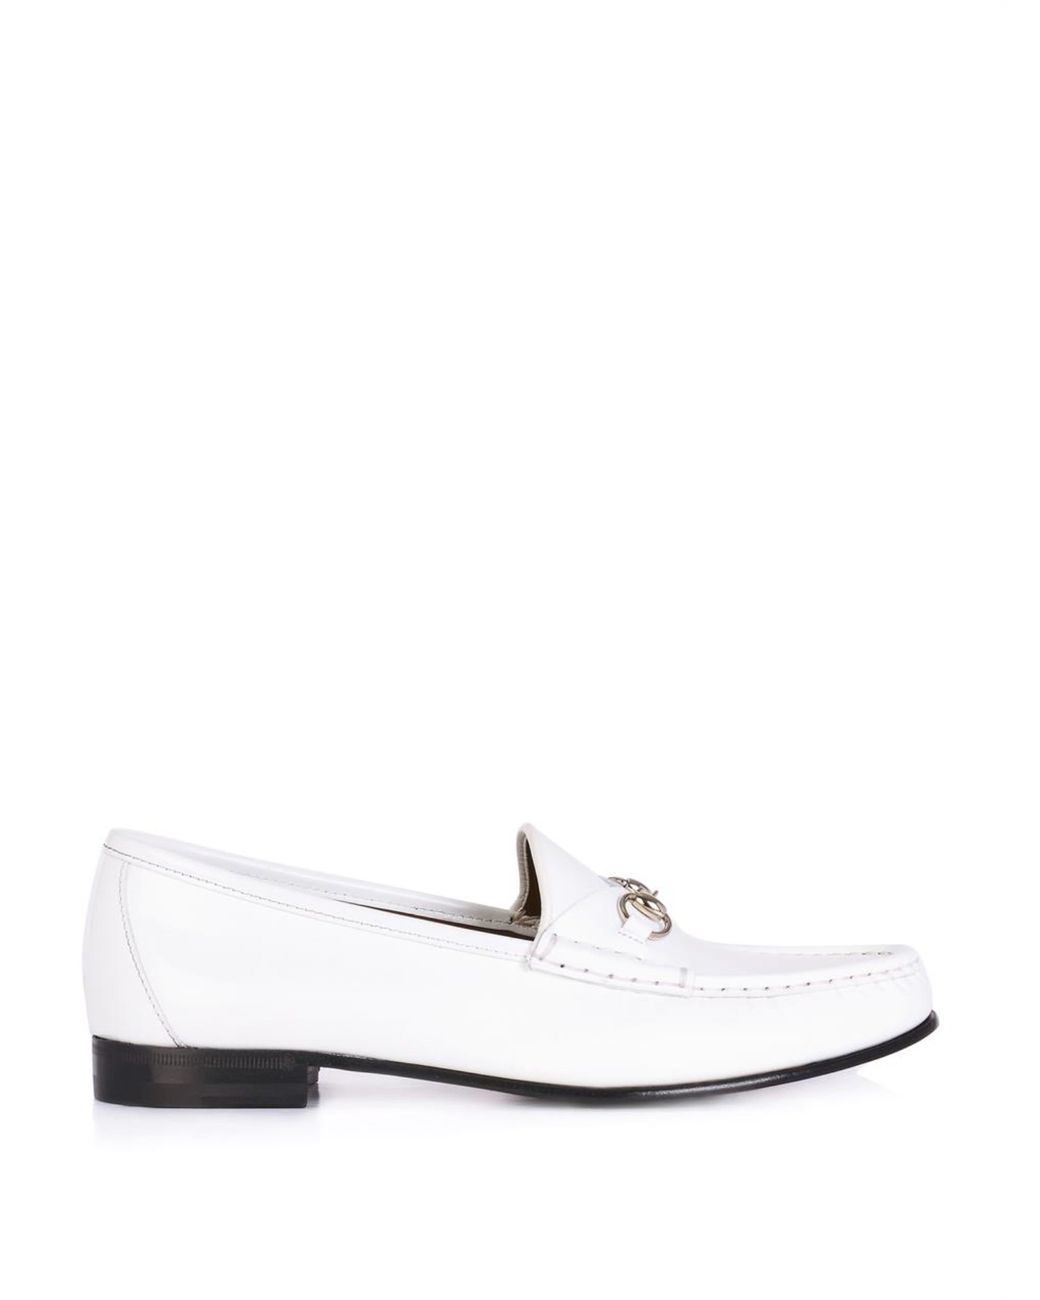 Gucci 1953 Leather Horsebit Loafers in White | Lyst